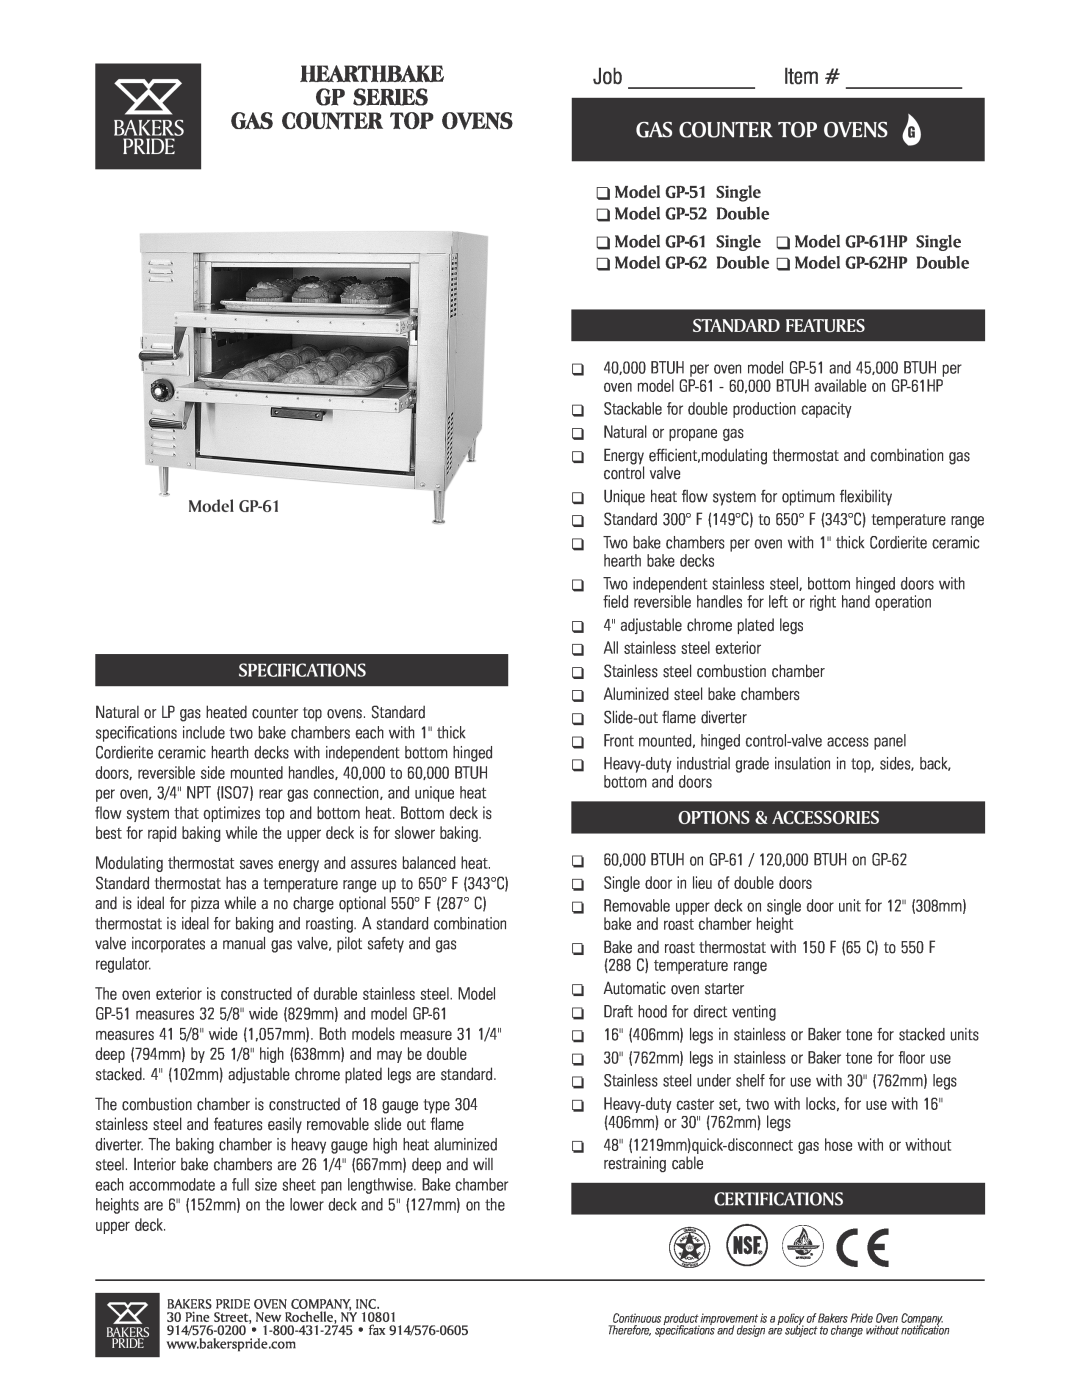 Bakers Pride Oven GP-62 specifications Job Item #, Hearthbake Gp Series, Bakers Gas Counter Top Ovens Pride, Model GP-61 